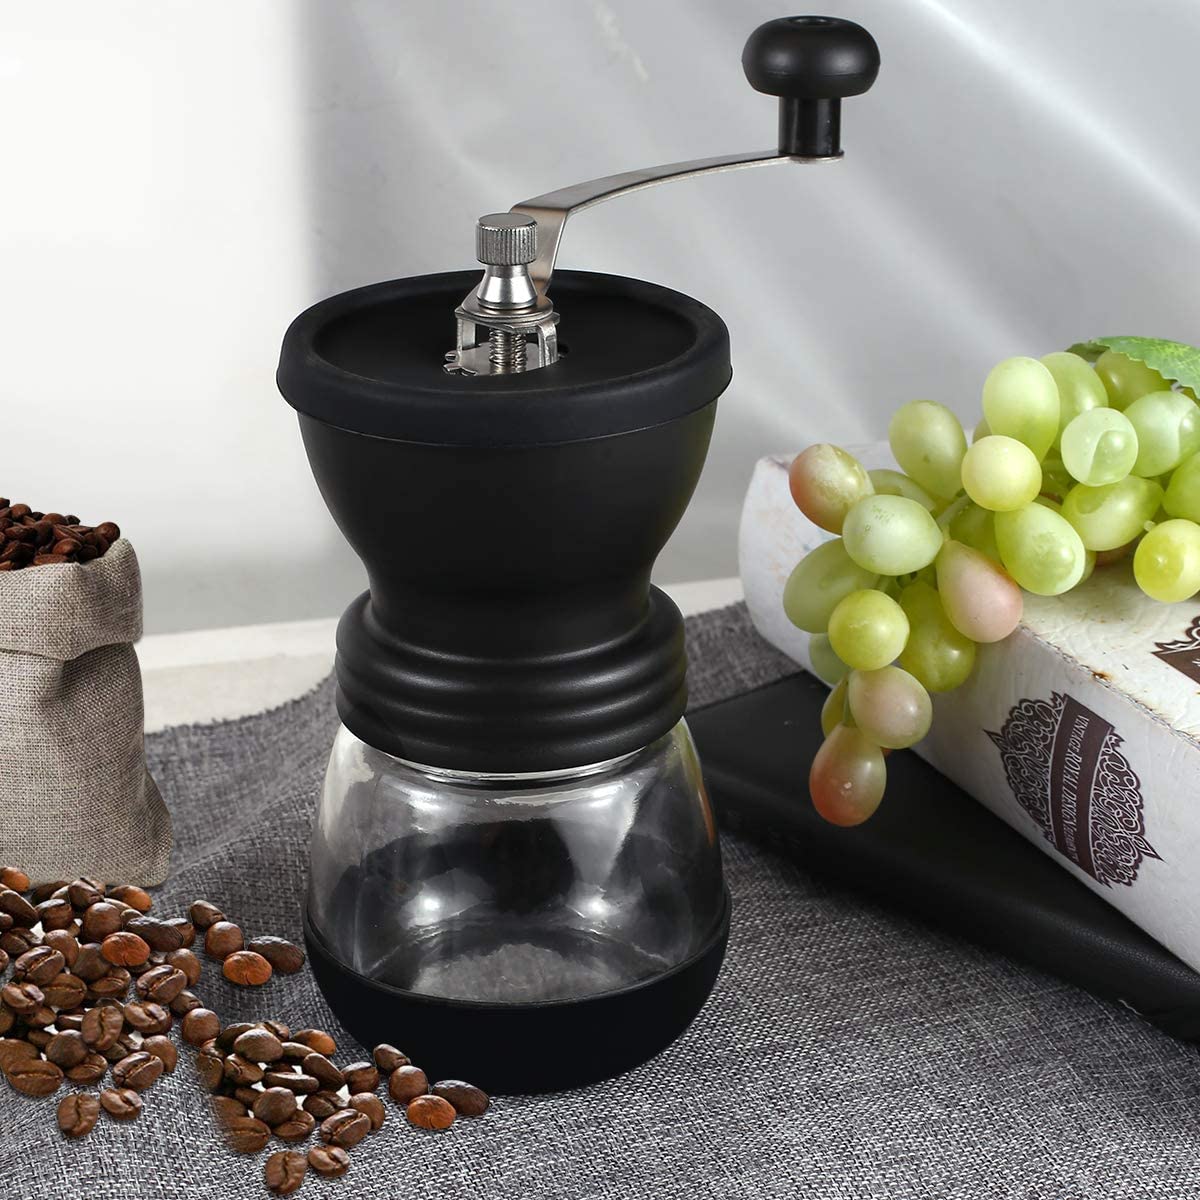 Wot I Coffee Grinder, Manual with Ceramic Grinder, Adjustable Hand Coffee Grinder, Gift Box Available